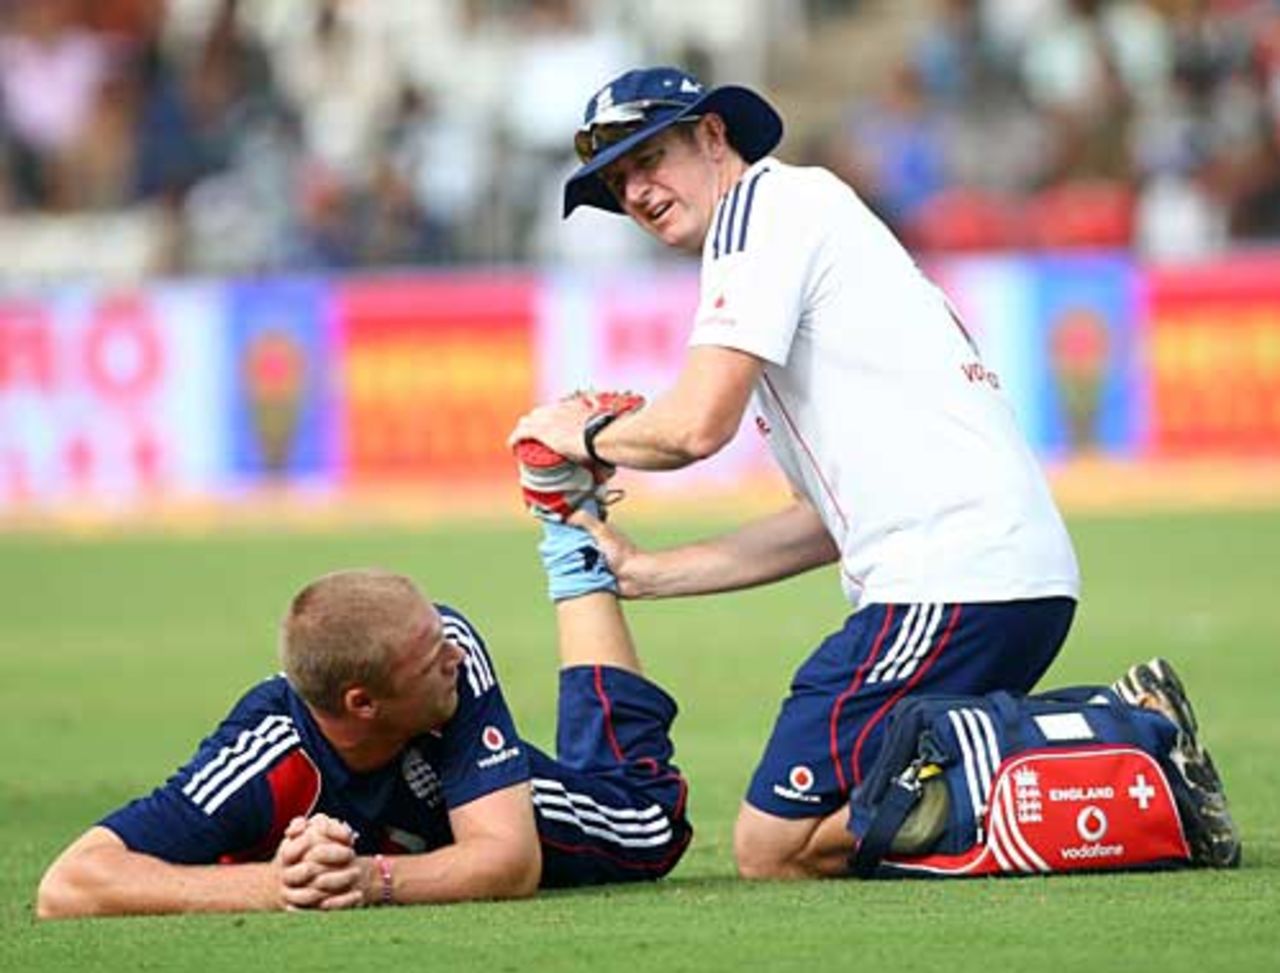 Andrew Flintoff receives some treatment on his ankle, India v England, 4th ODI, Bangalore, November 23, 2008